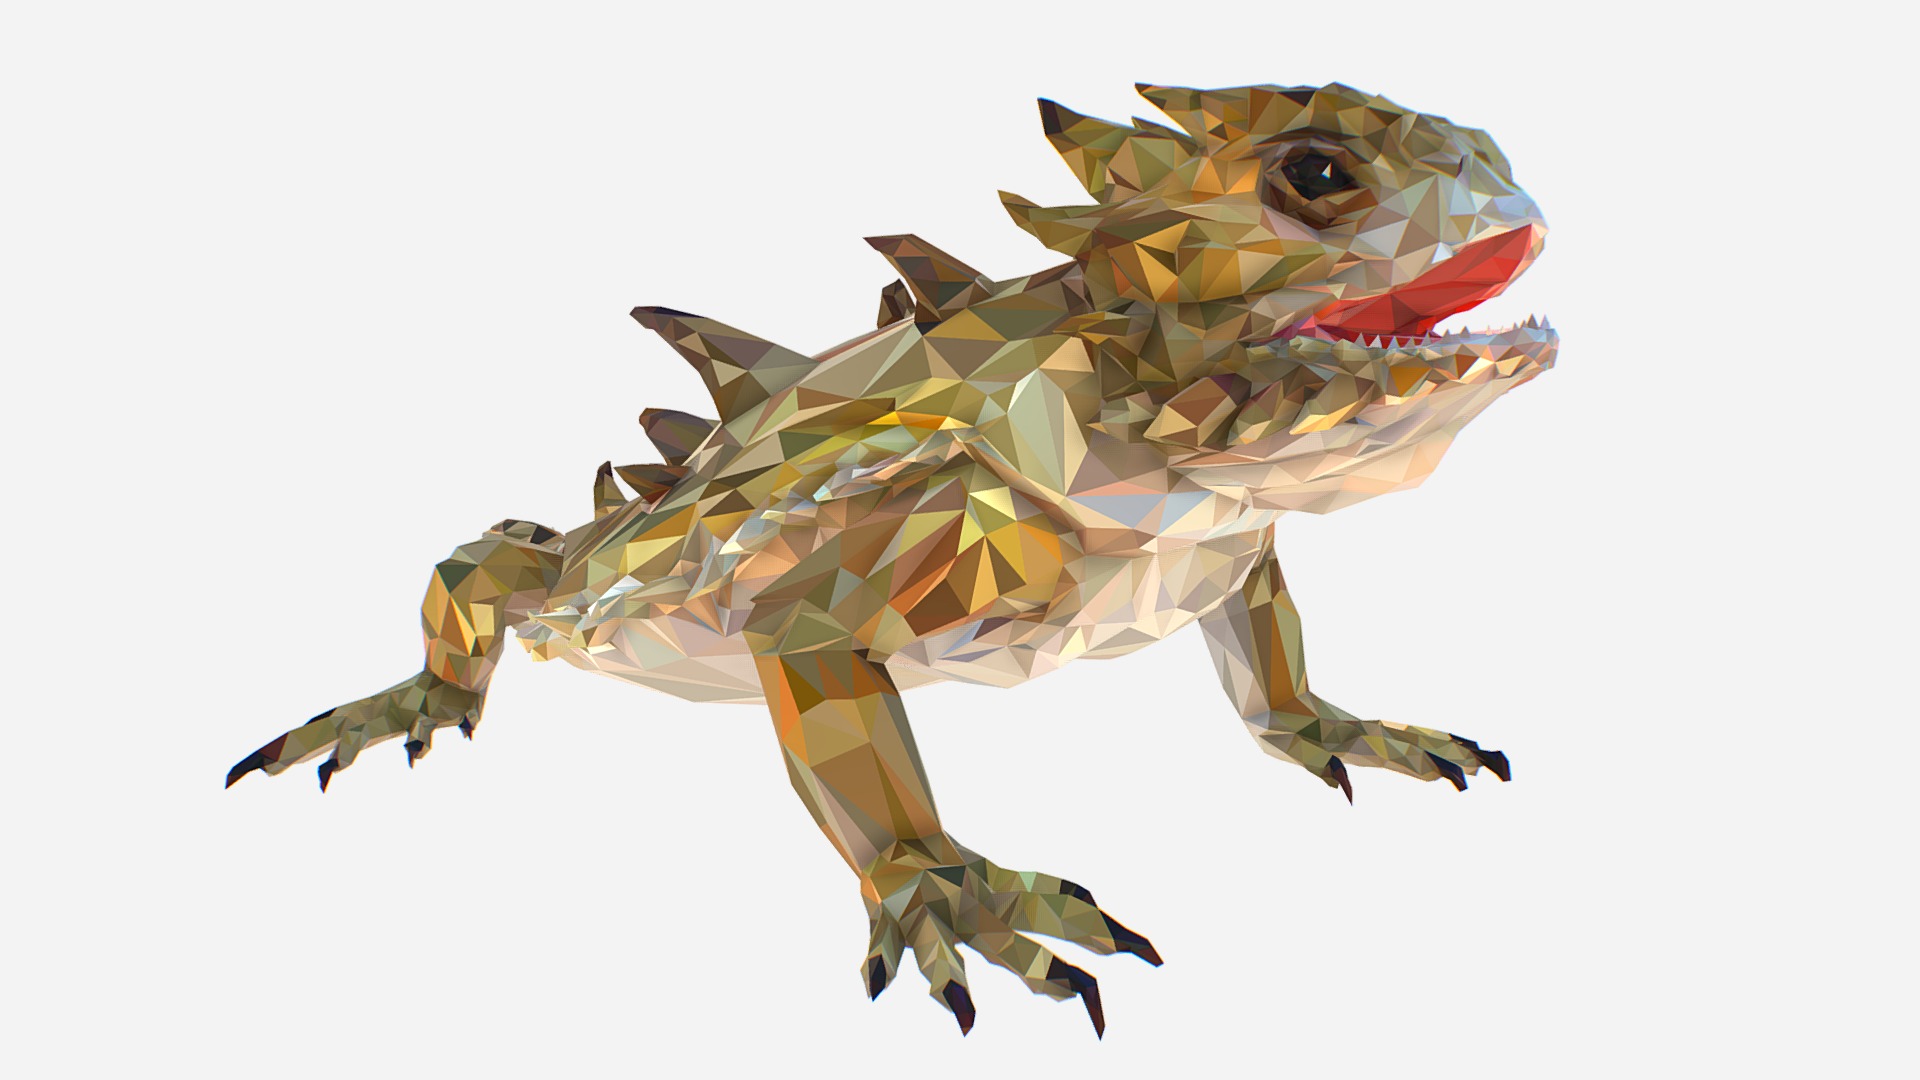 3D model Lizard Low Polygon Art Reptile Animal - This is a 3D model of the Lizard Low Polygon Art Reptile Animal. The 3D model is about a colorful lizard with a white background.